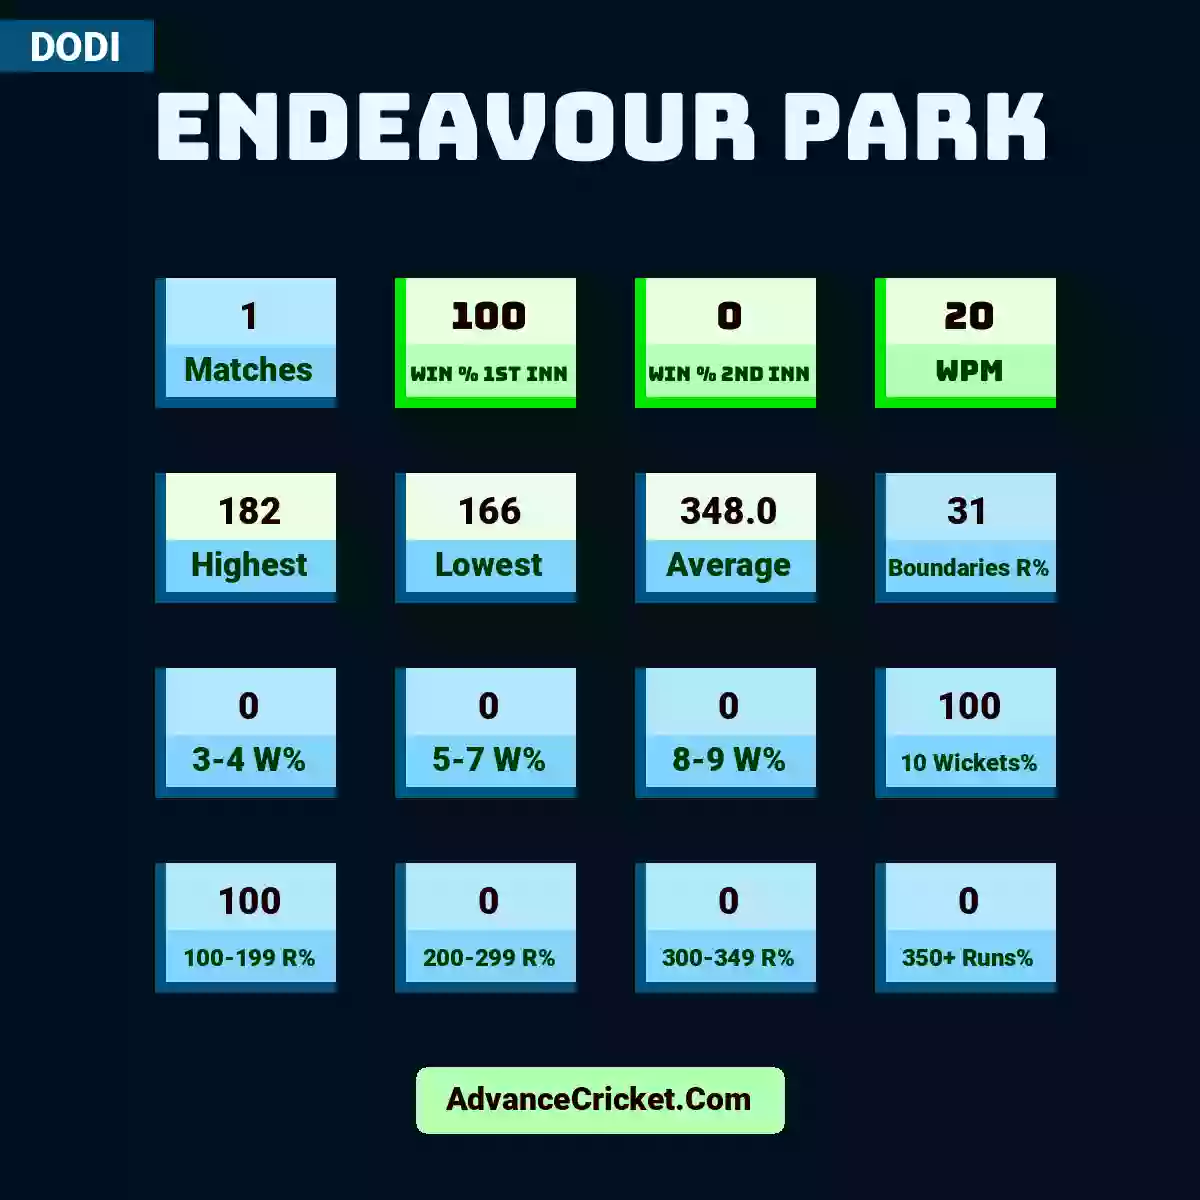 Image showing Endeavour Park with Matches: 1, Win % 1st Inn: 100, Win % 2nd Inn: 0, WPM: 20, Highest: 182, Lowest: 166, Average: 348.0, Boundaries R%: 31, 3-4 W%: 0, 5-7 W%: 0, 8-9 W%: 0, 10 Wickets%: 100, 100-199 R%: 100, 200-299 R%: 0, 300-349 R%: 0, 350+ Runs%: 0.